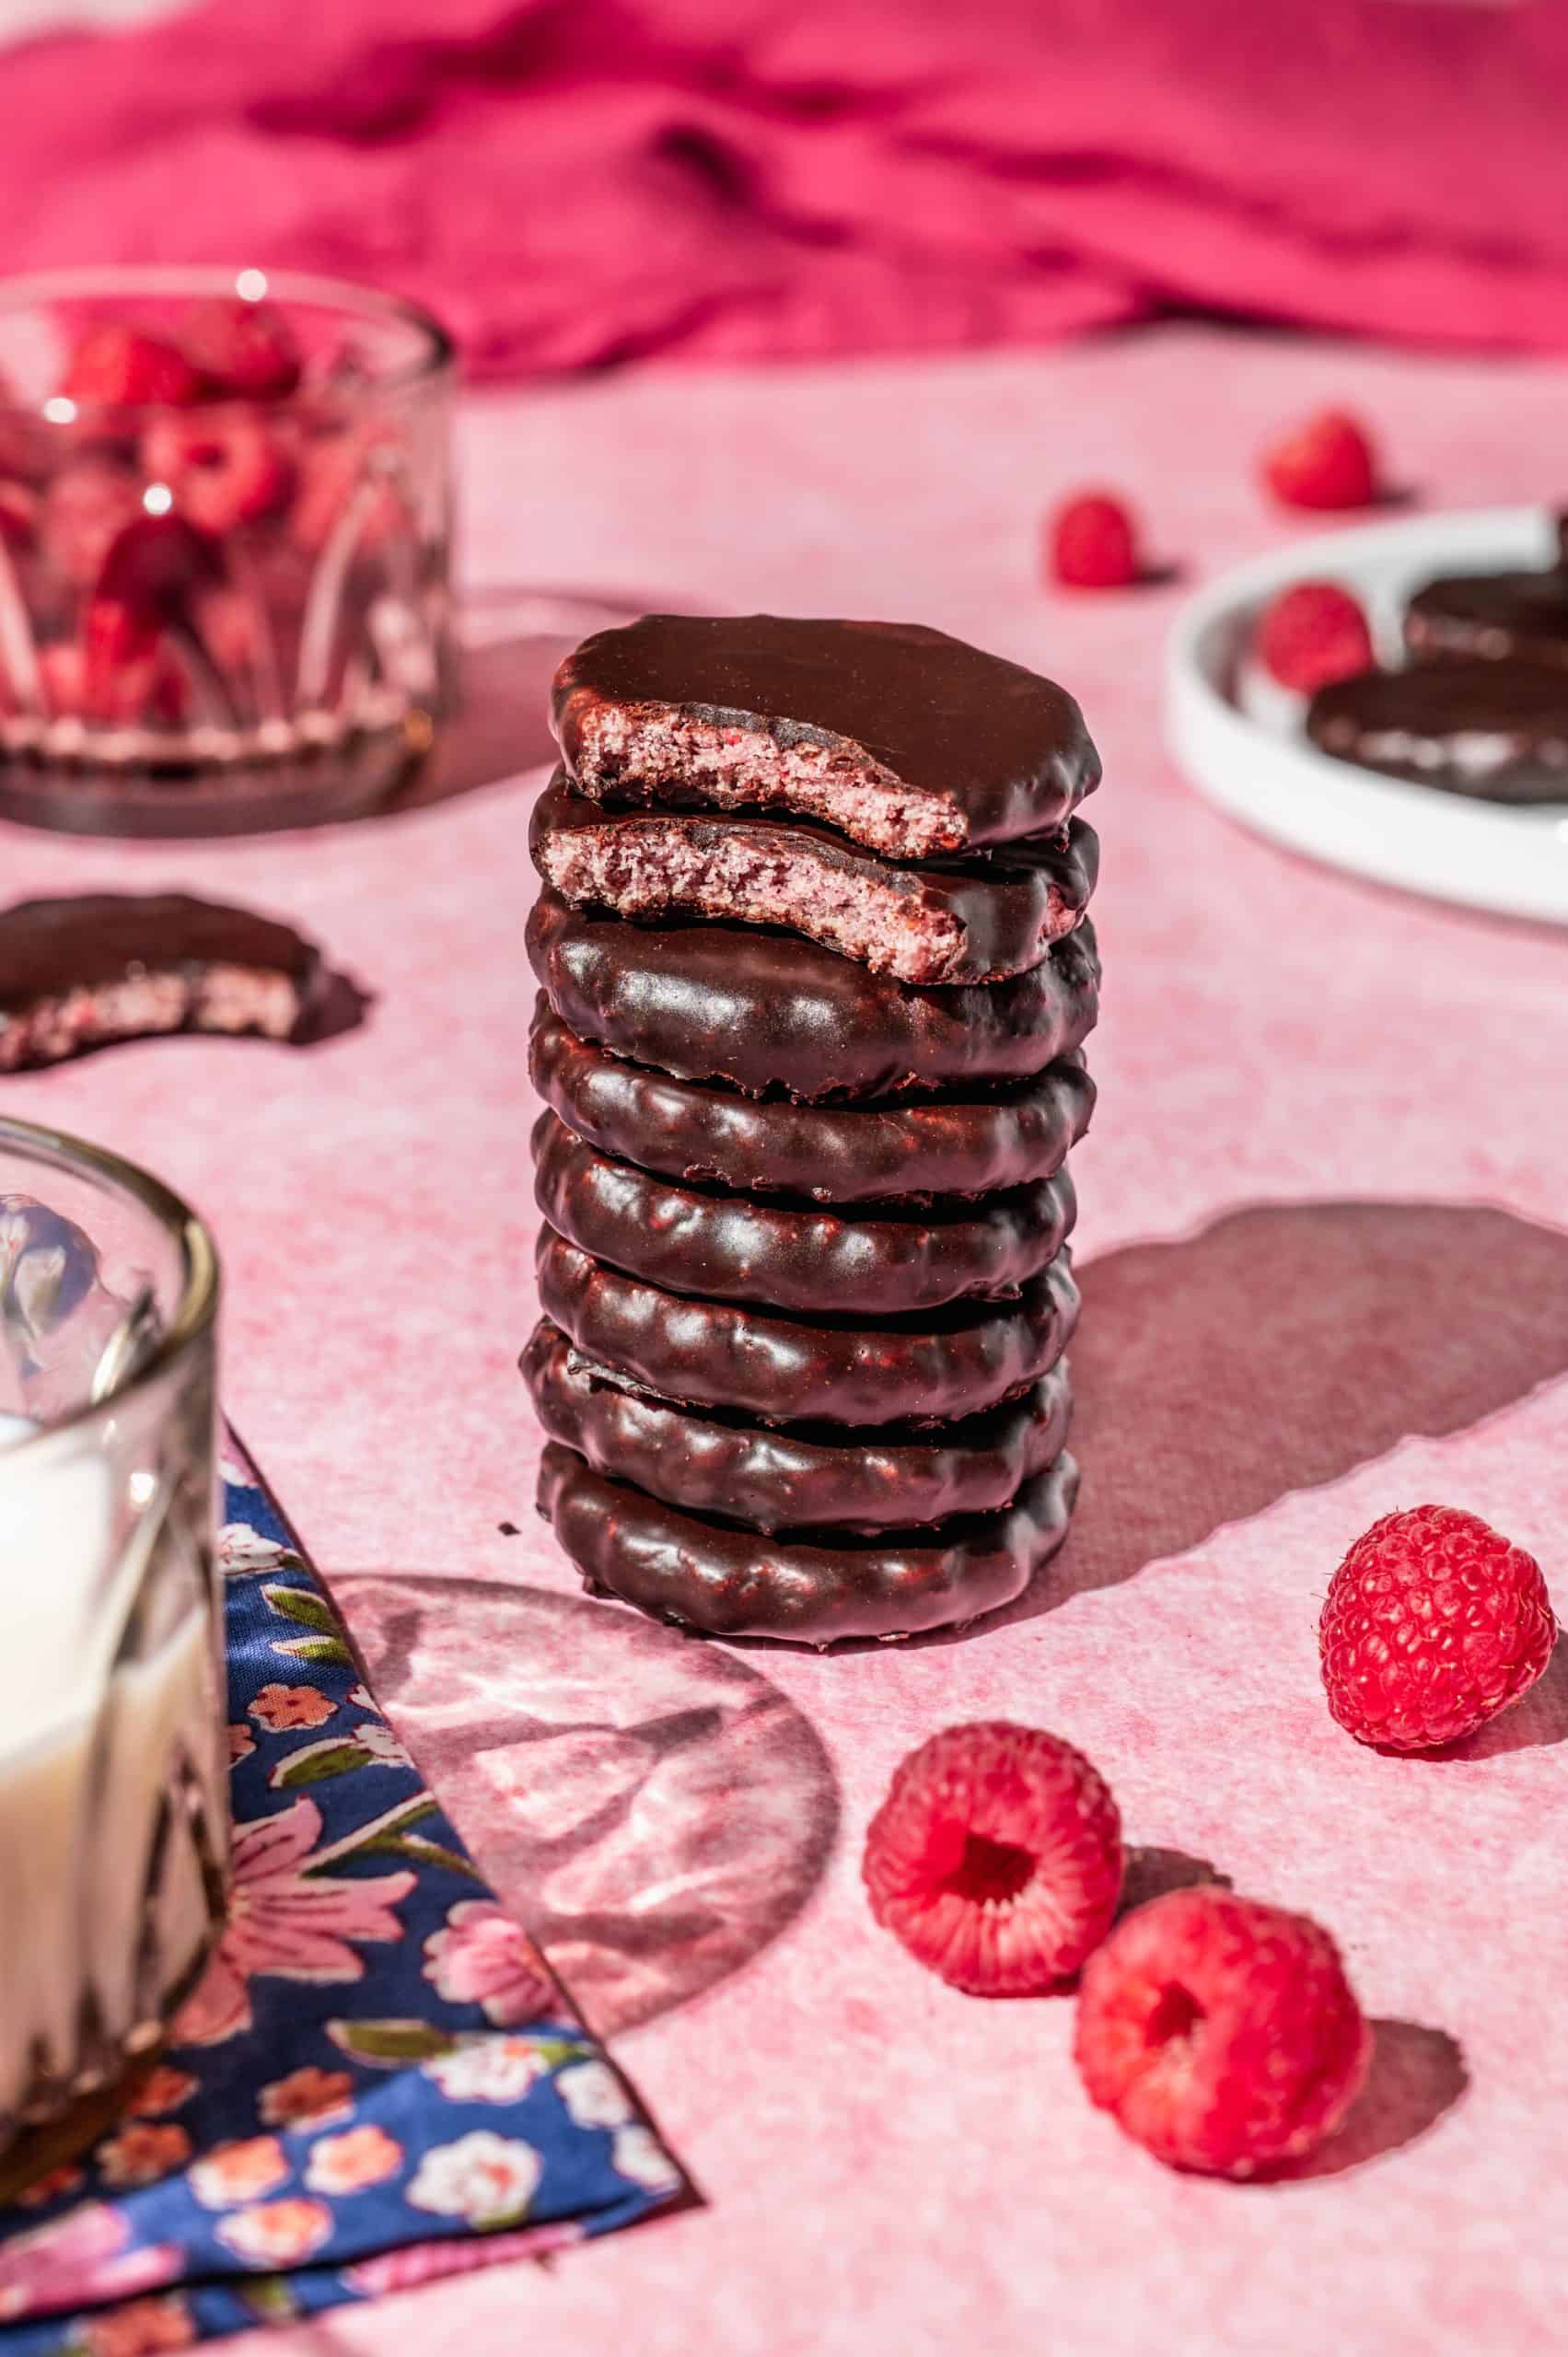 a stack of 8 raspberry rally cookies, the top 2 show the pink cookie inside the chocolate coating